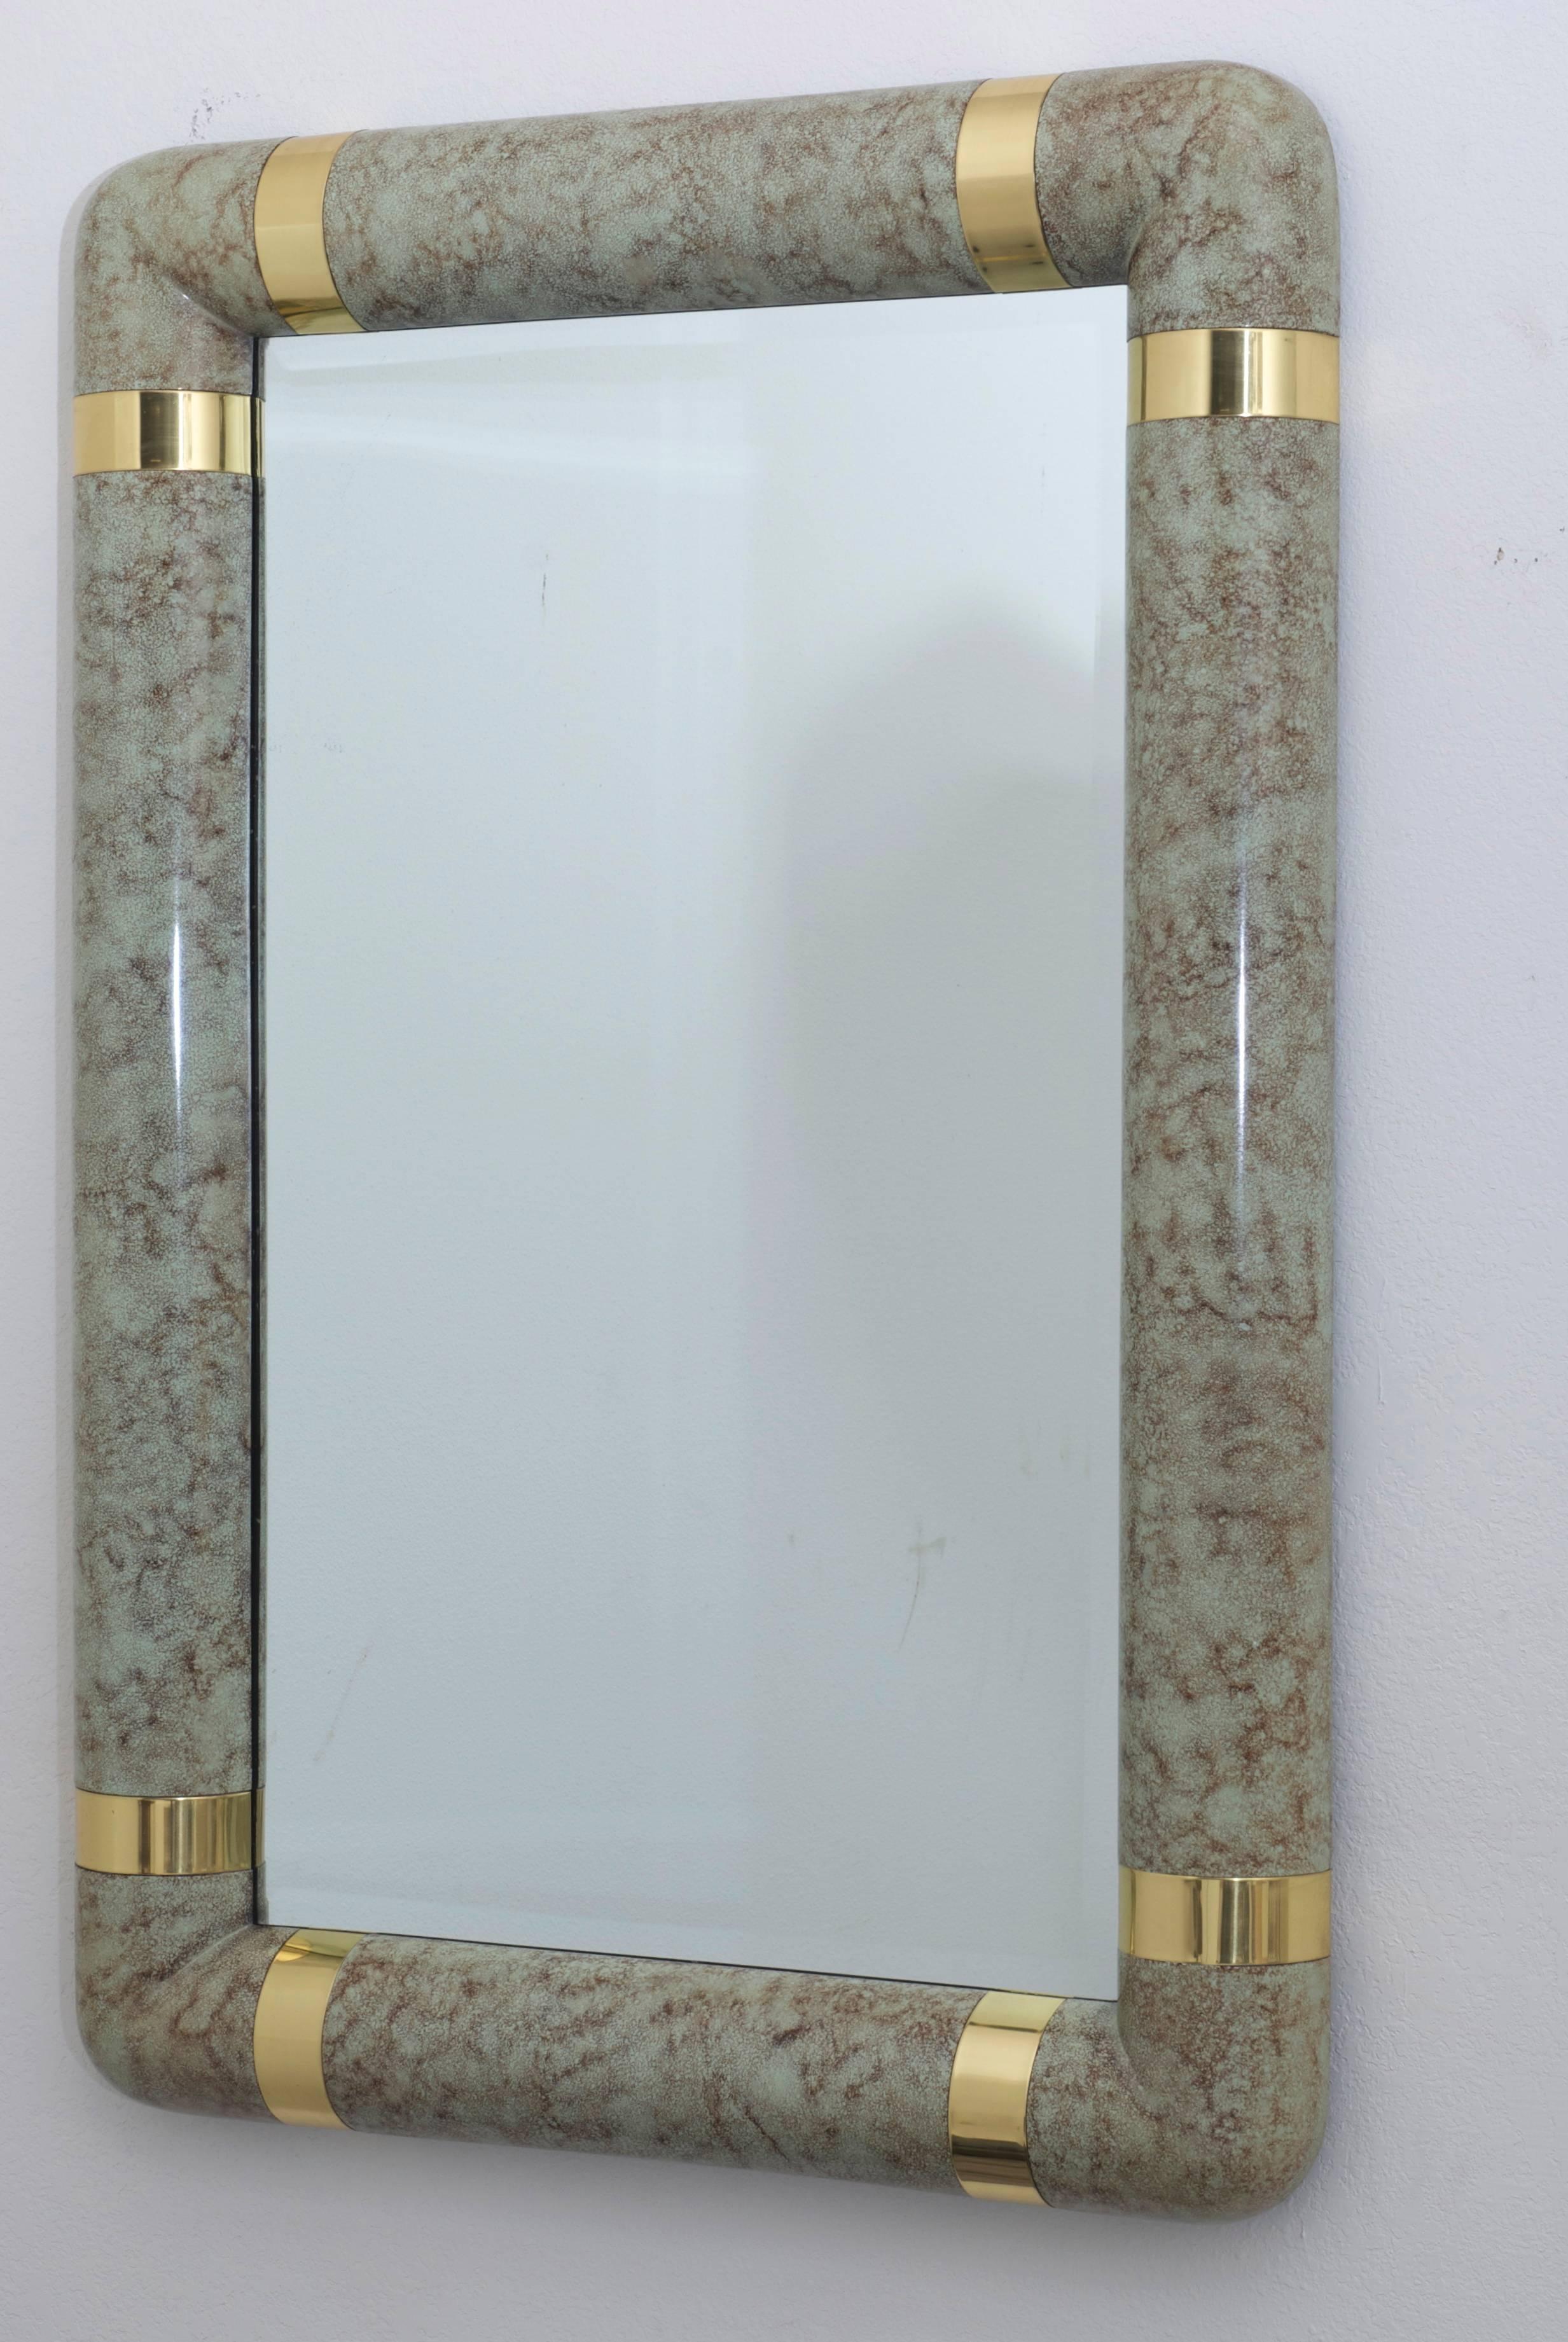 A heavy Karl Springer style mirror with a faux parchment veneer with brass details at the corners.
There are four mounting clips on the back so that it can be hung either vertically or horizontally.